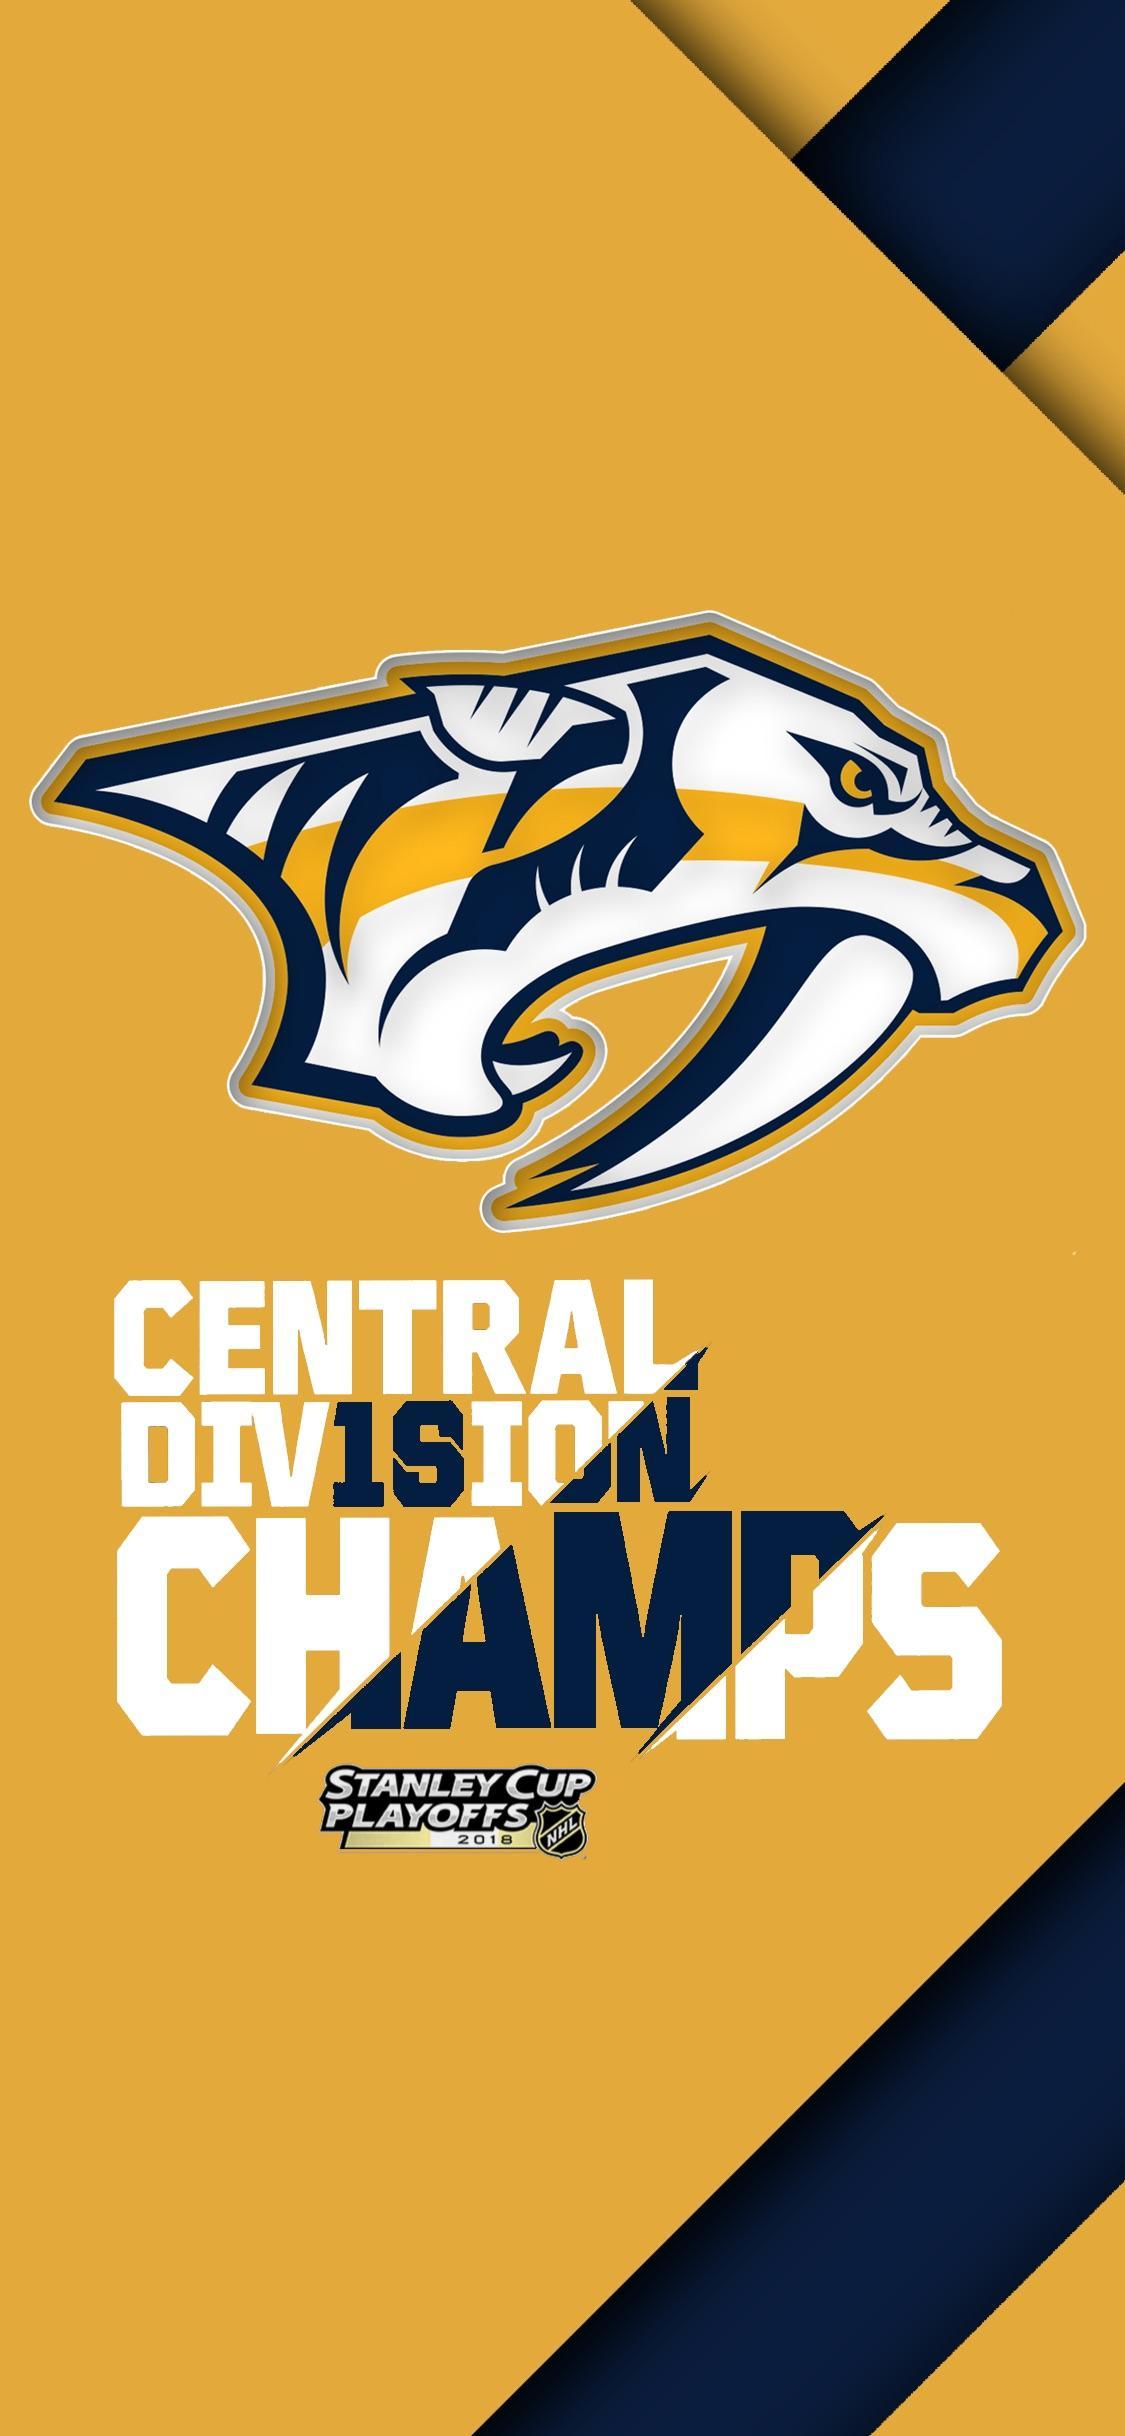 Division champ wallpaper iPhone X